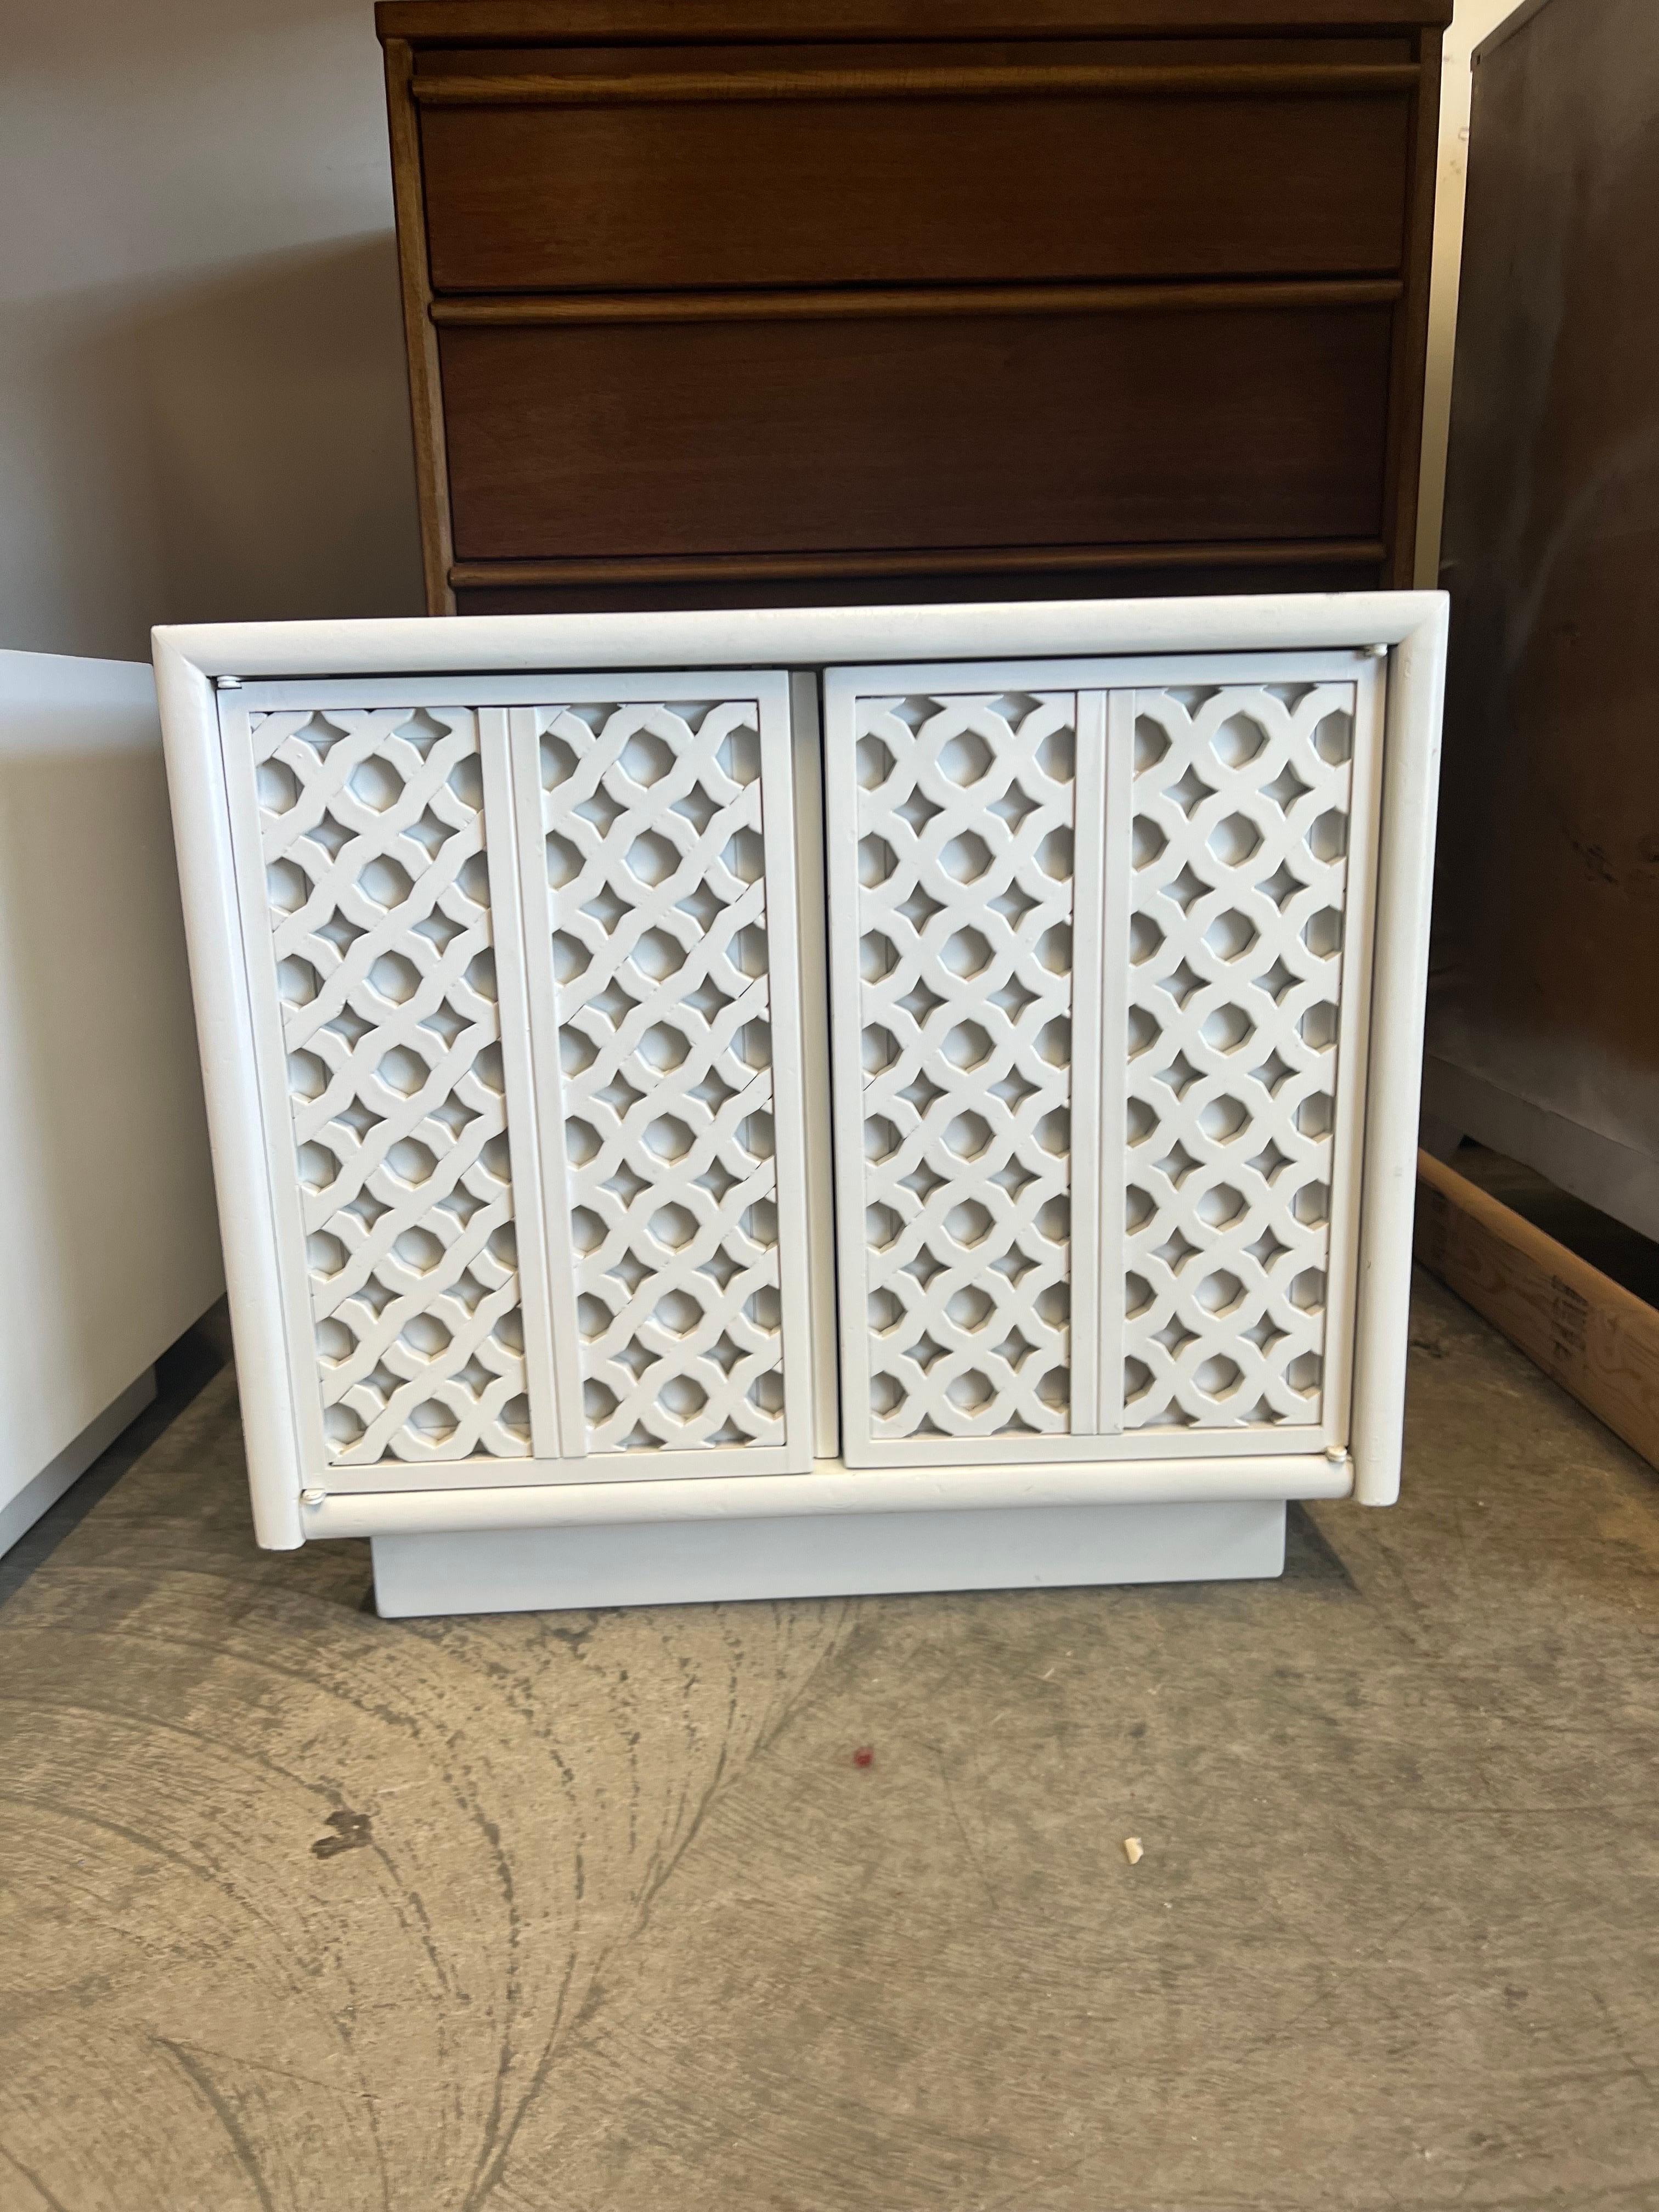 I like to think of these as the breeze blocks end tables/nightstands. They have a funky weave design on the front. The double door cabinet style nightstands open to reveal one adjustable shelf. Lacquered in gloss white.